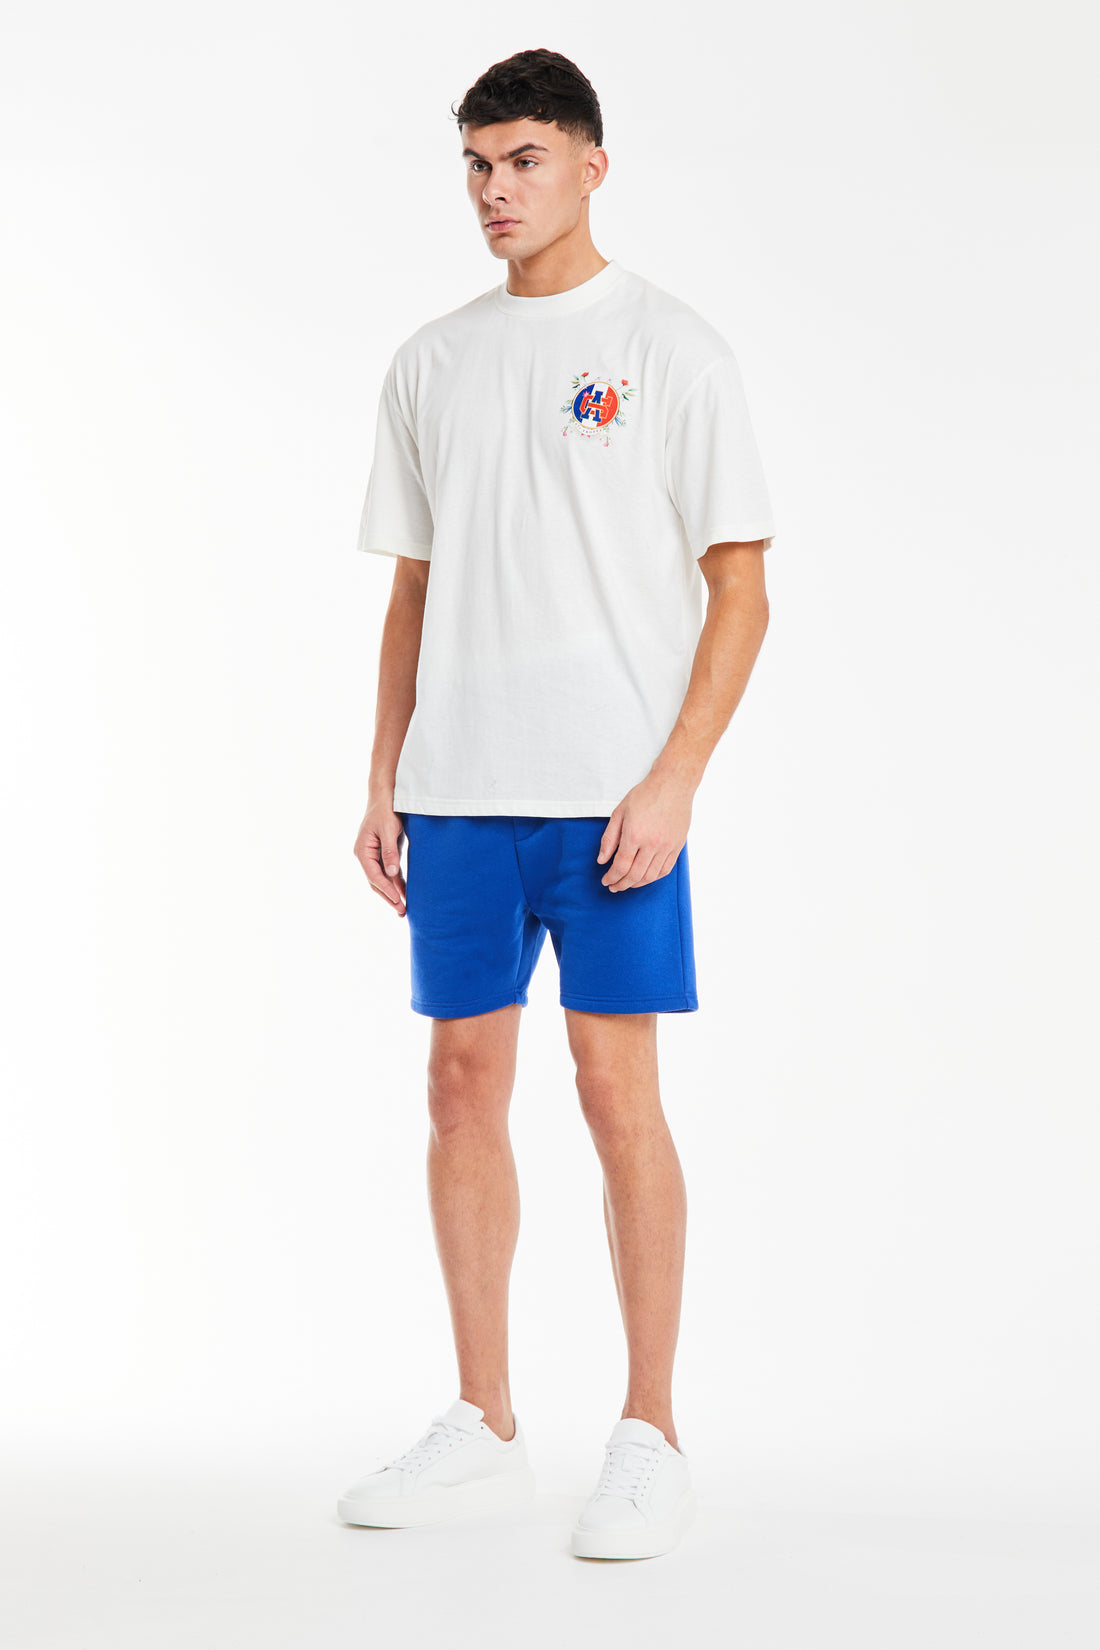 mens t shirt sale in off white styled with shorts